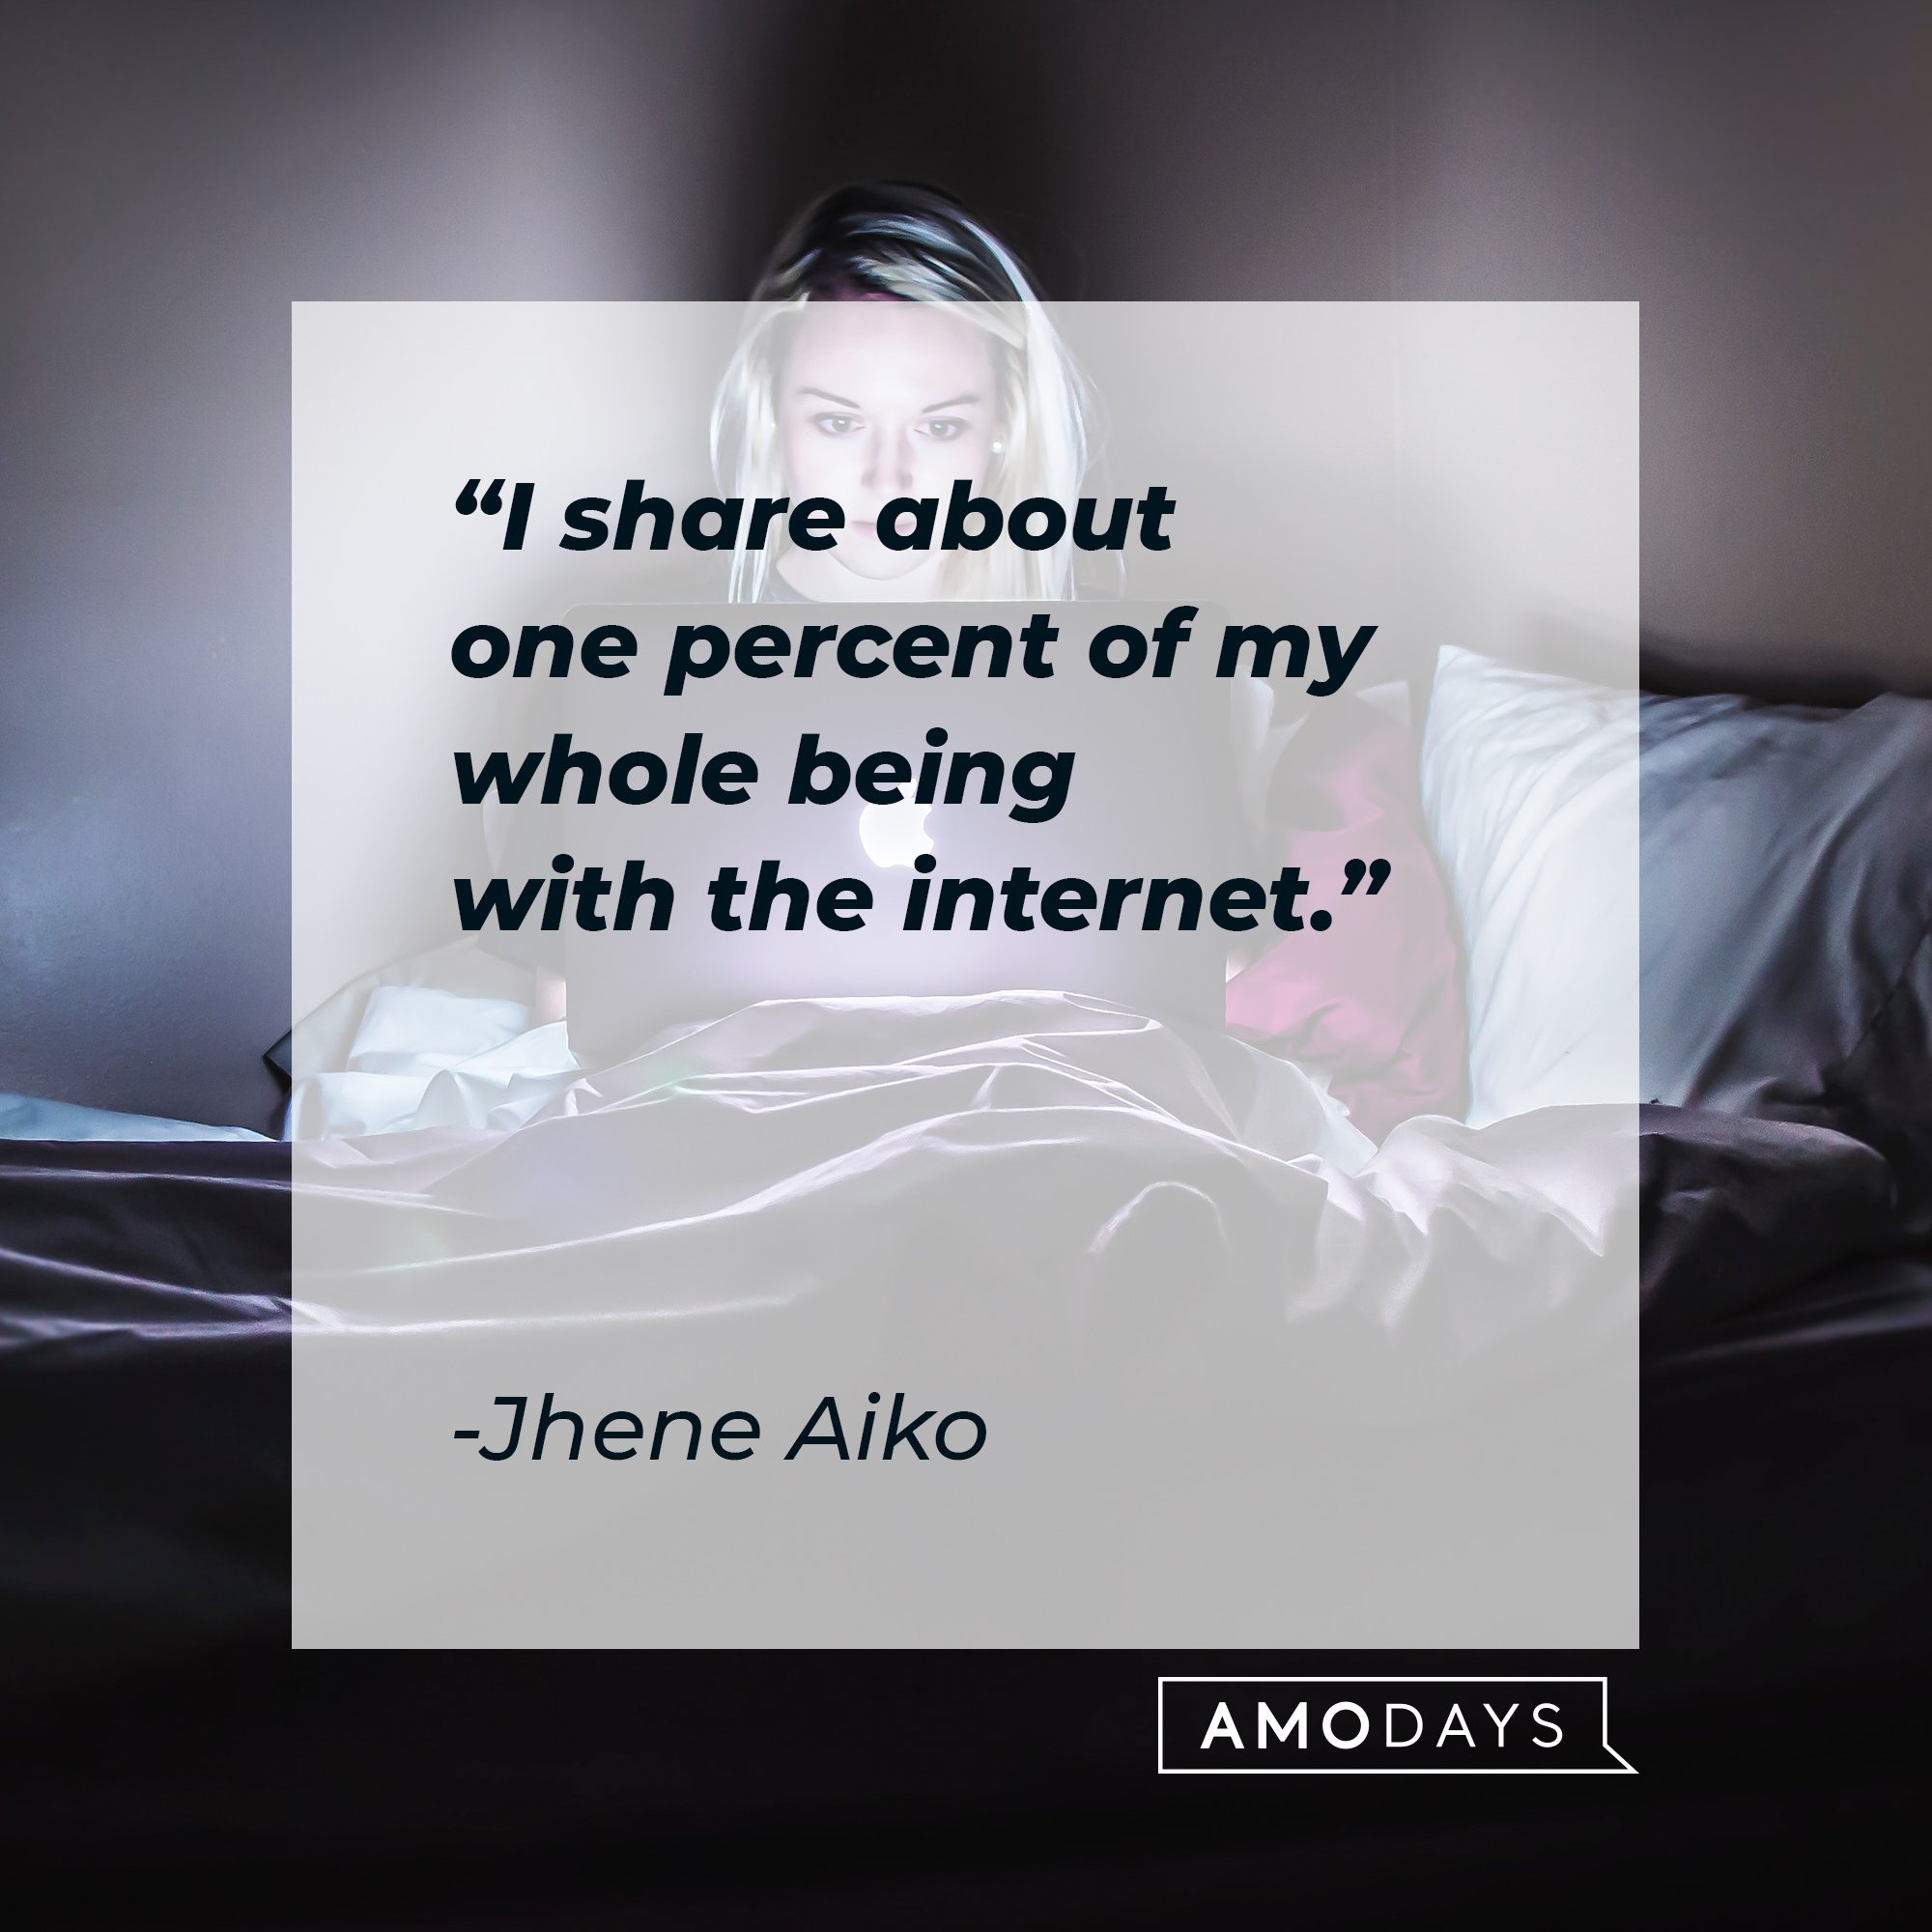  Jhene Aiko's quote: "I share about one percent of my whole being with the internet." | Image: AmoDays